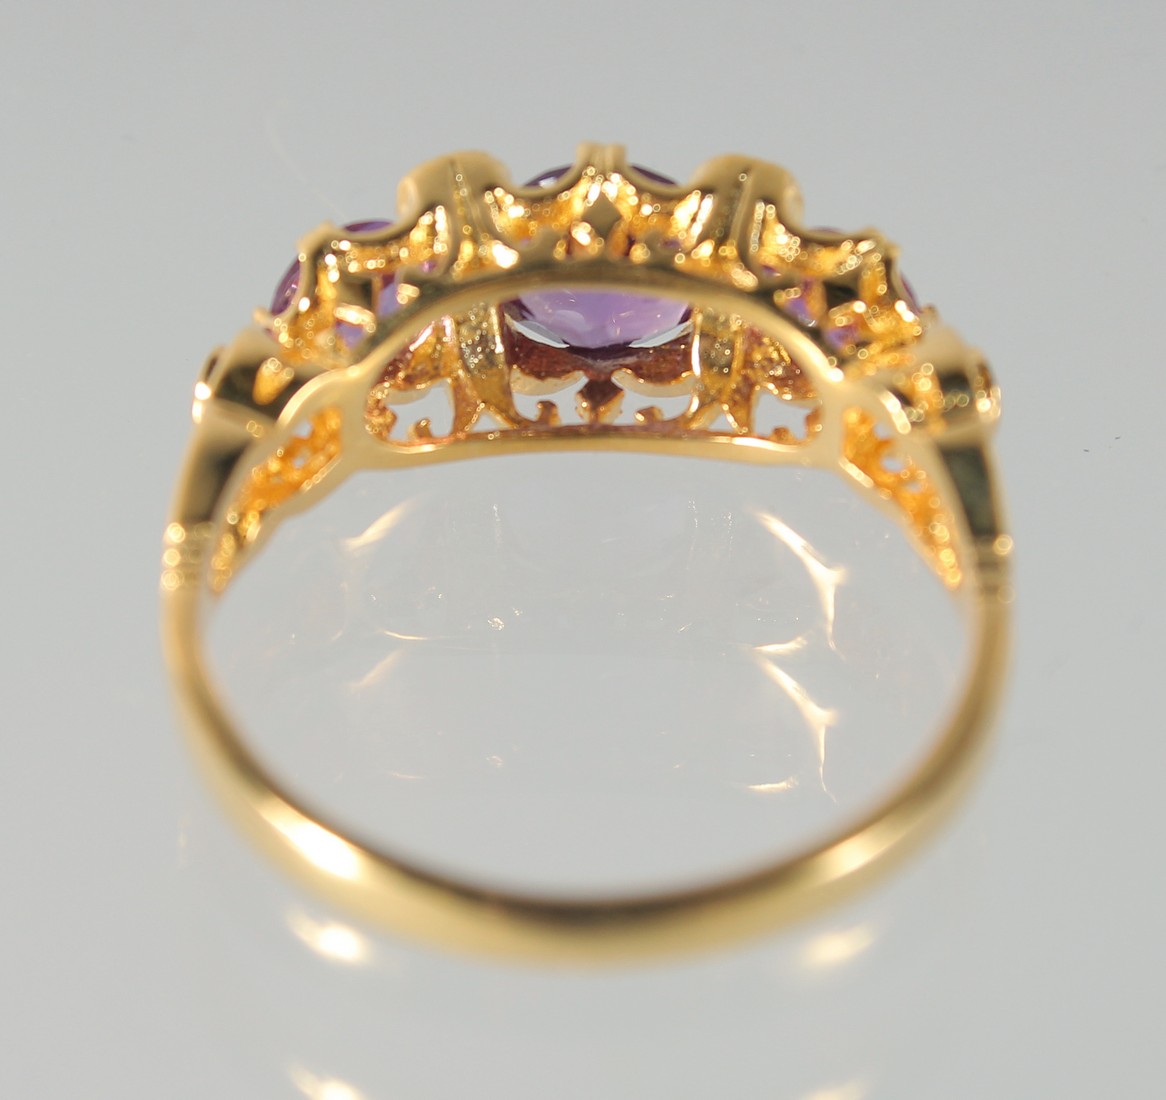 A SILVER AND GOLD-PLATED AMETHYST AND PEARL RING. - Image 2 of 2